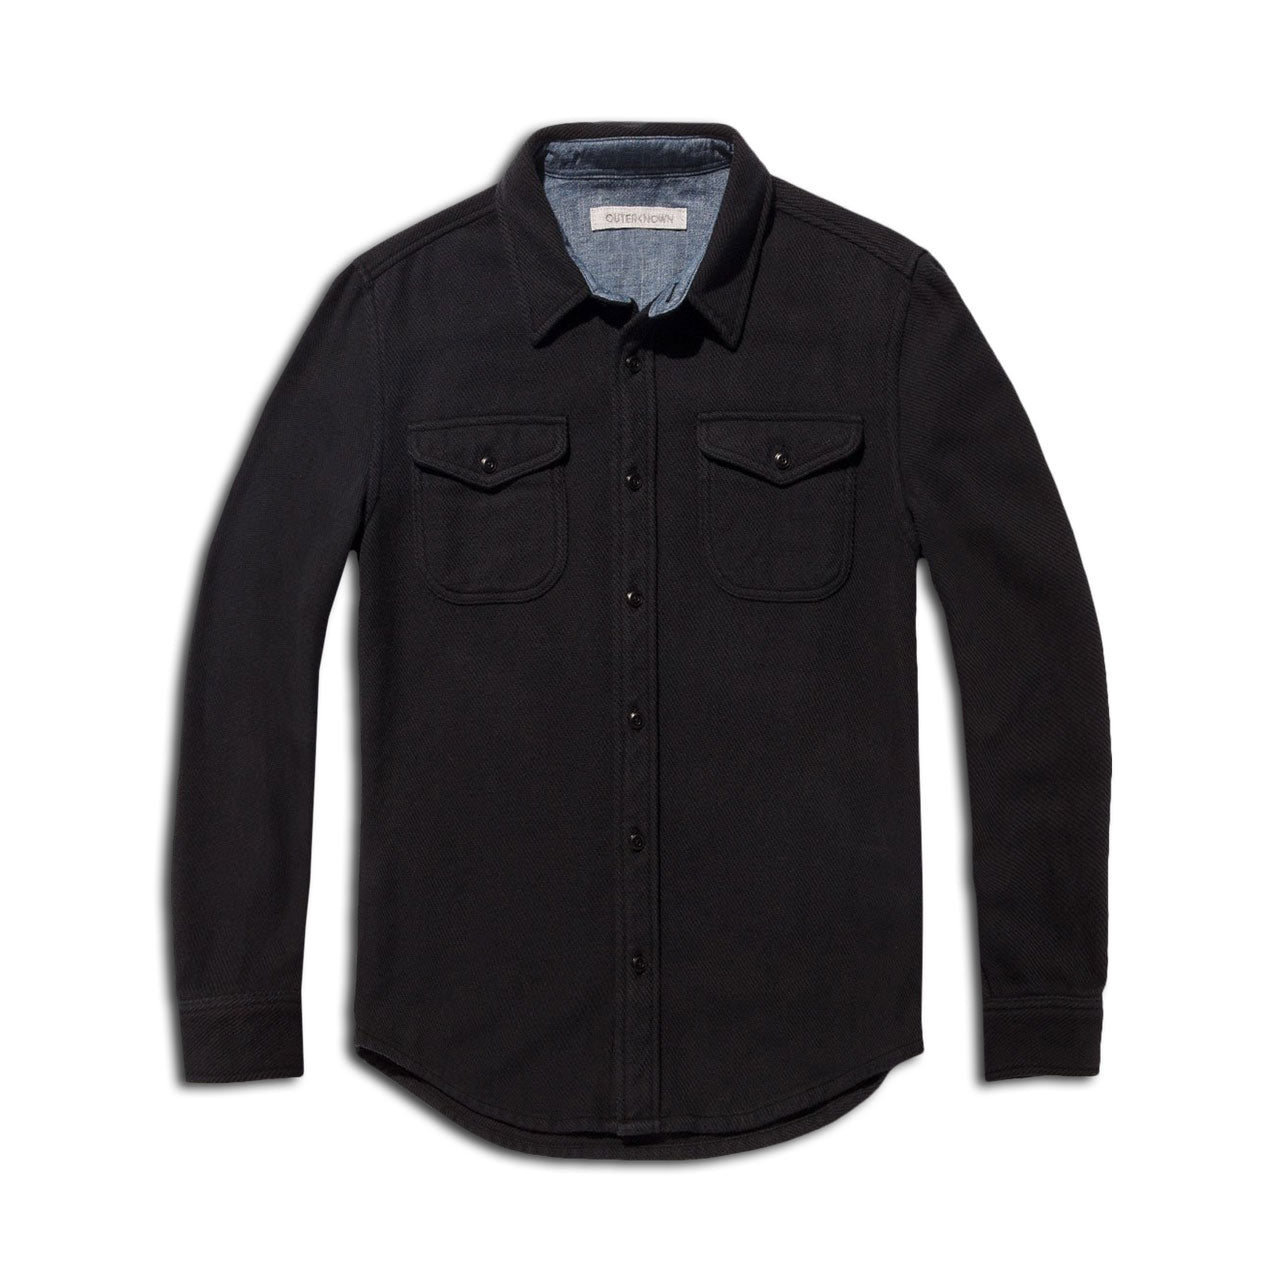 Outerknown Blanket Shirt | Uncrate